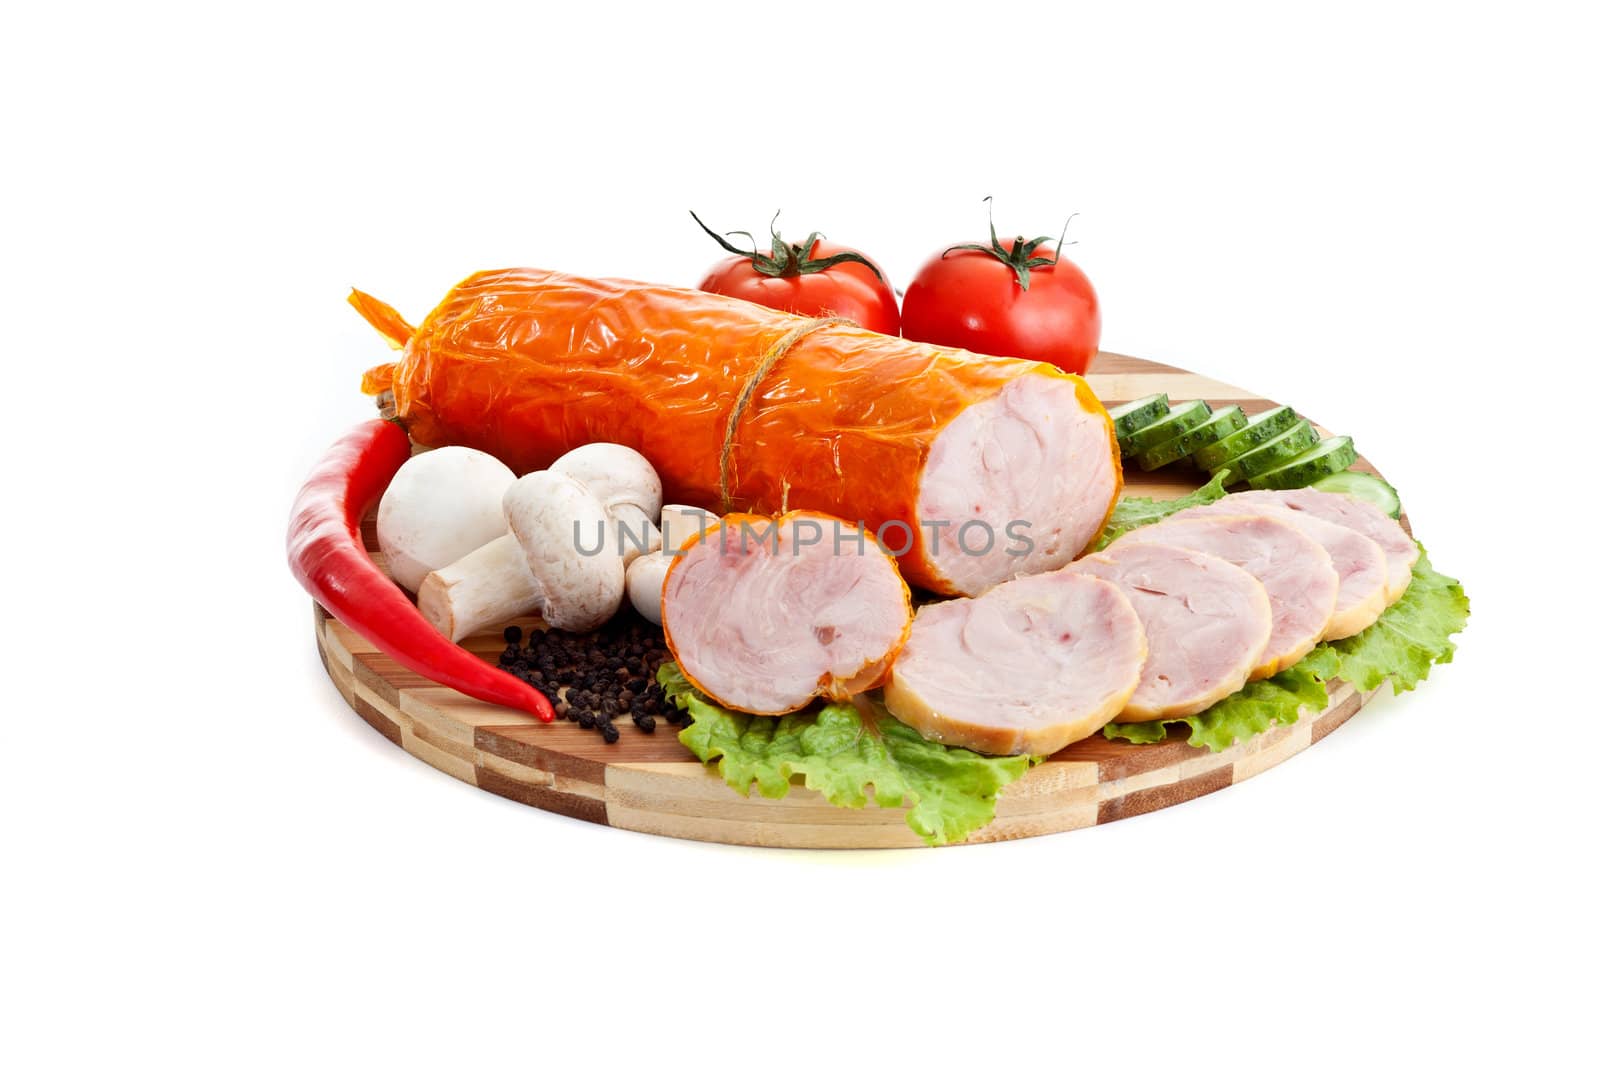 sausages in coposition with vegetables isolated on white